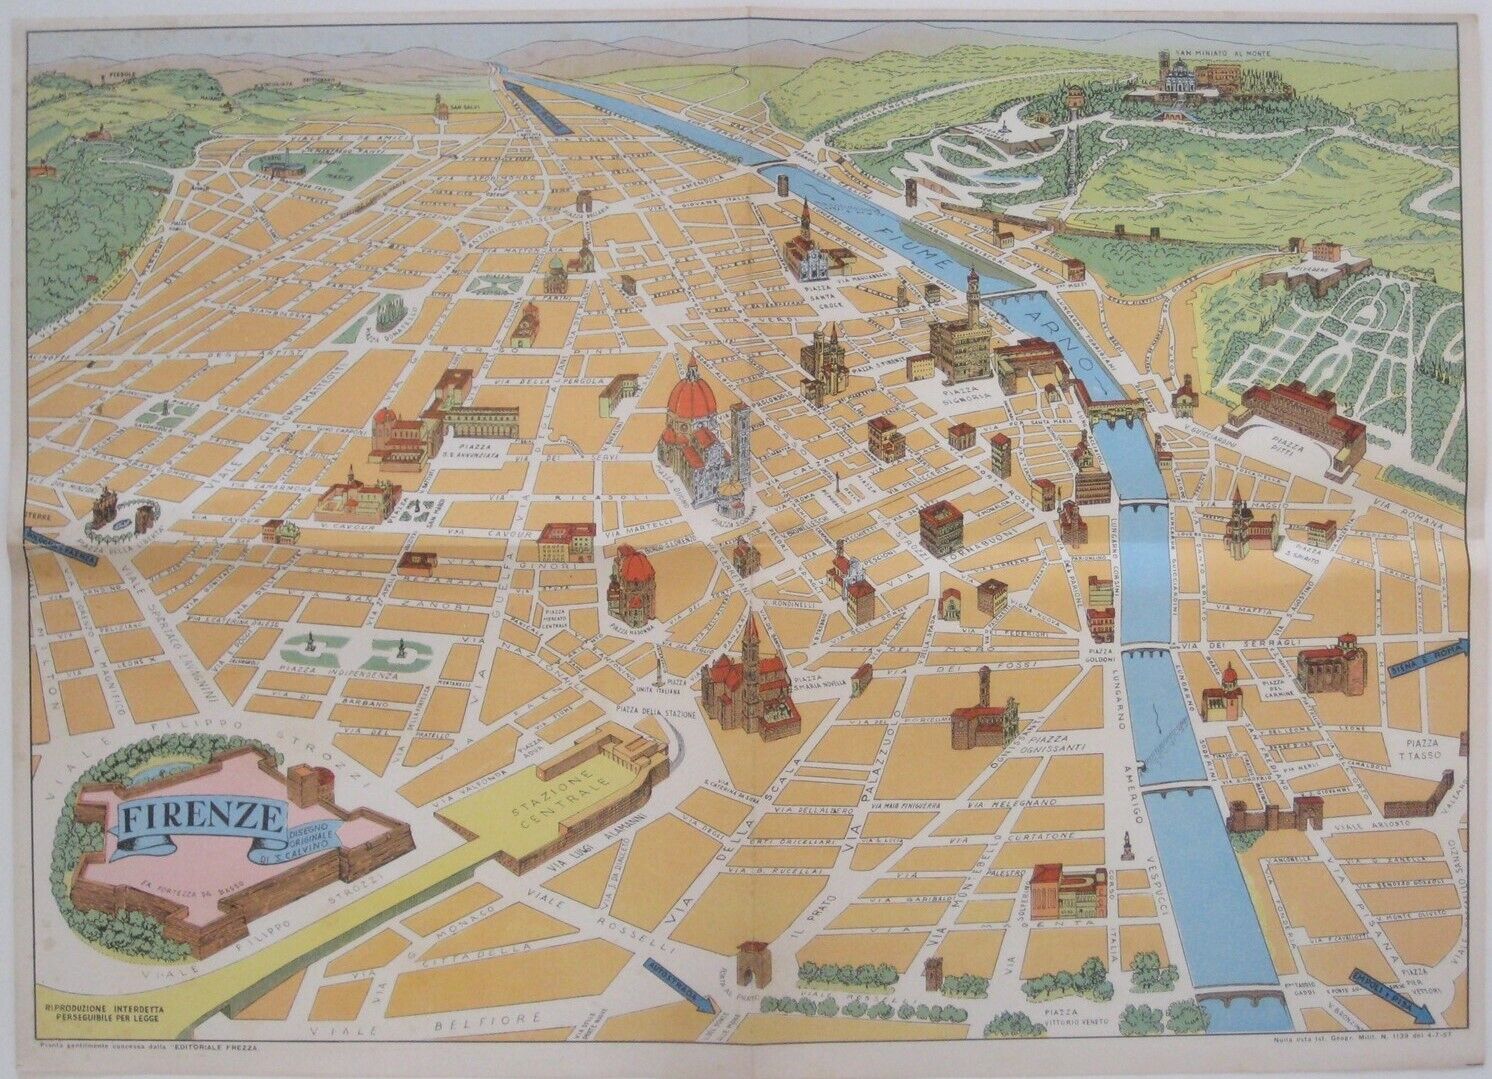 1957 Colorful Pictorial Bird's-Eye-View Map FIRENZE FLORENCE Italy by S. Calvino